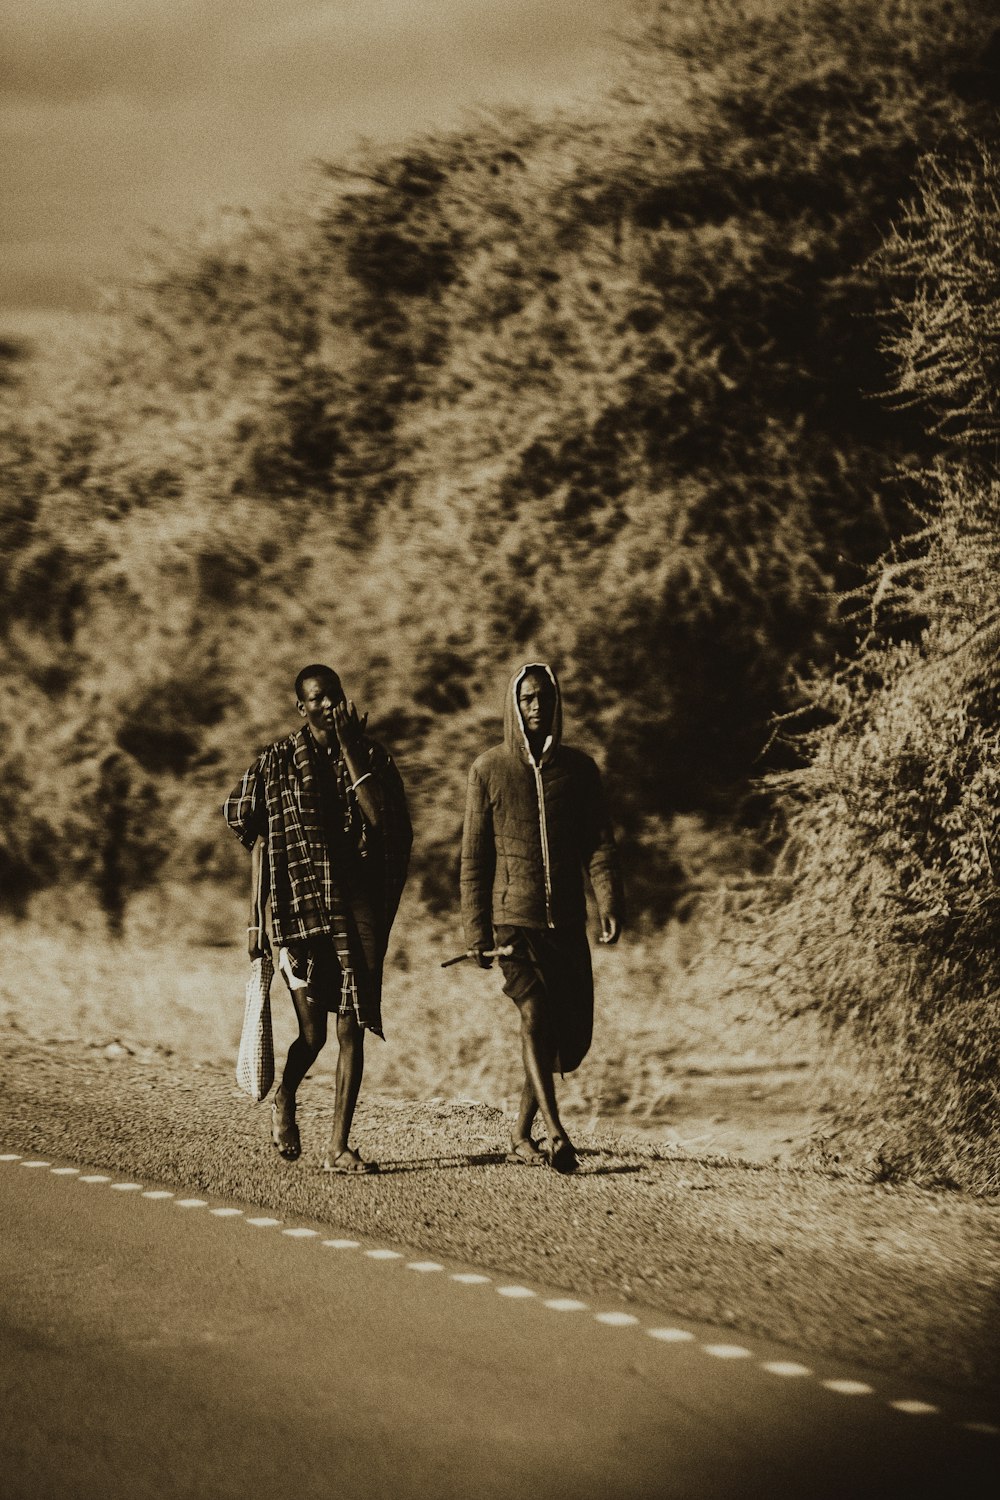 two people walking down a road with a hill in the background